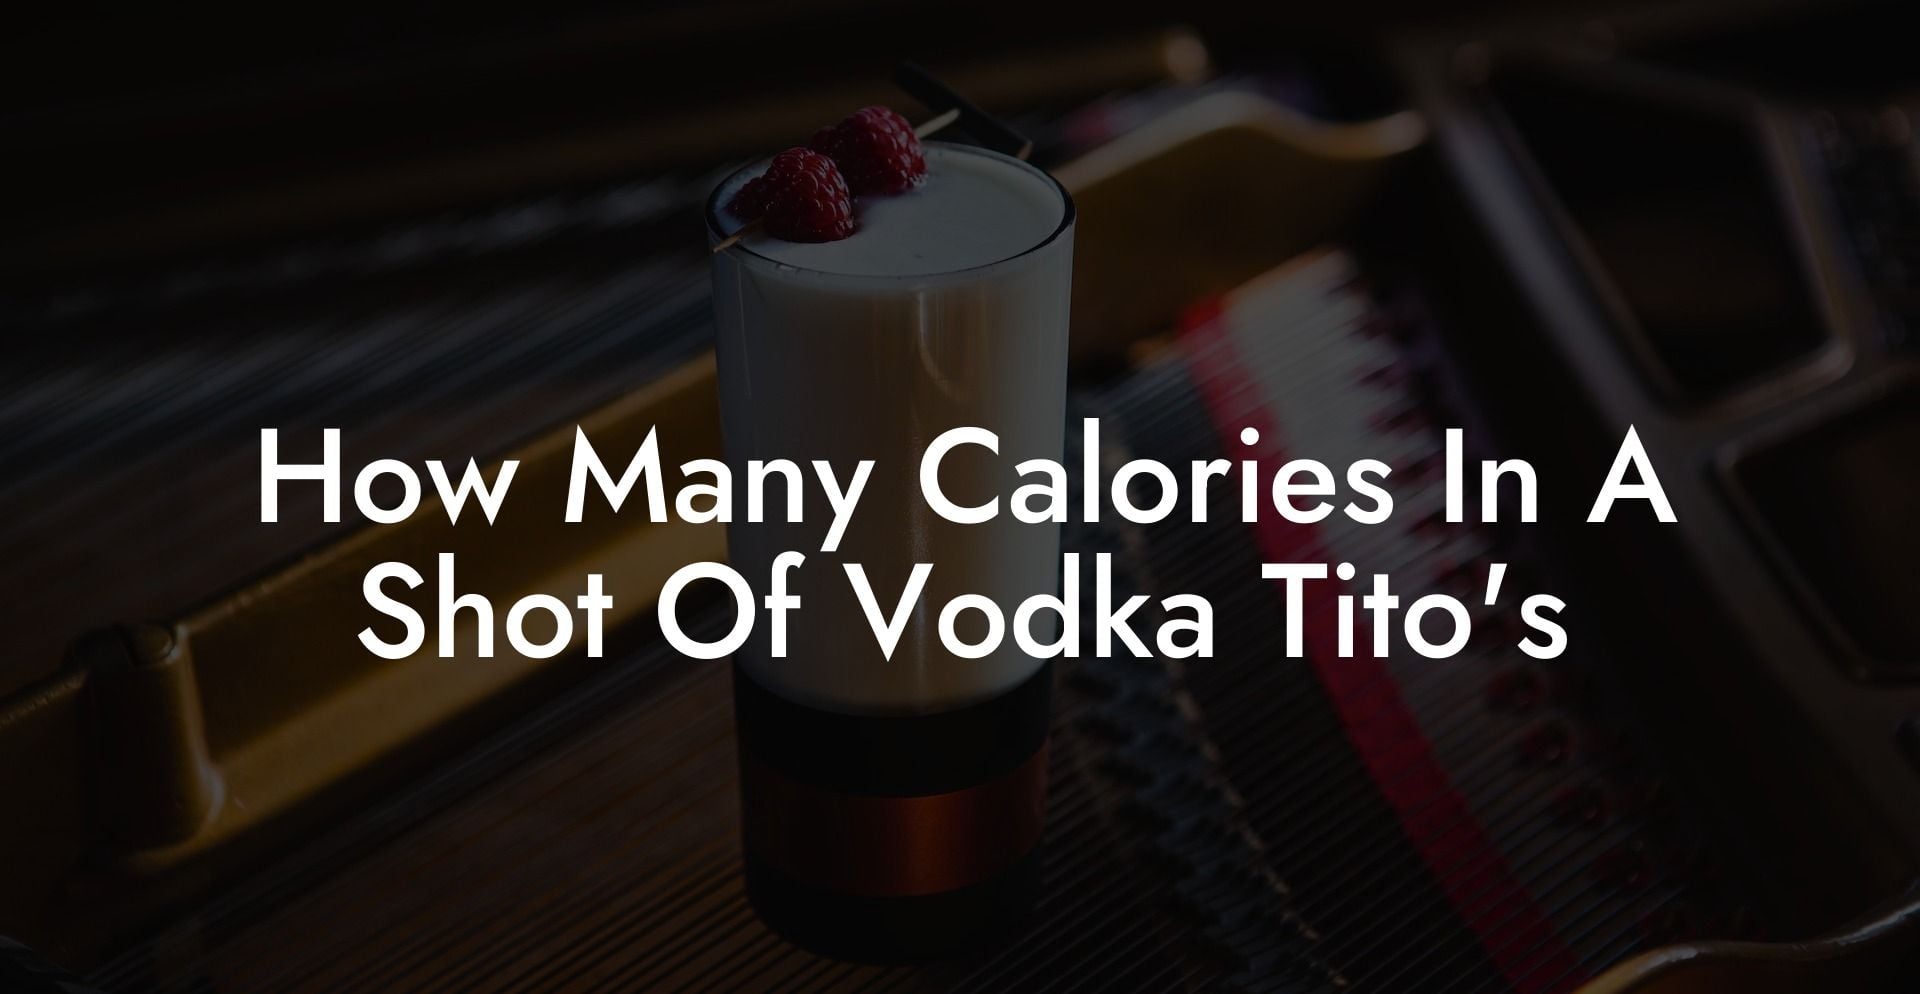 How Many Calories In A Shot Of Vodka Tito's